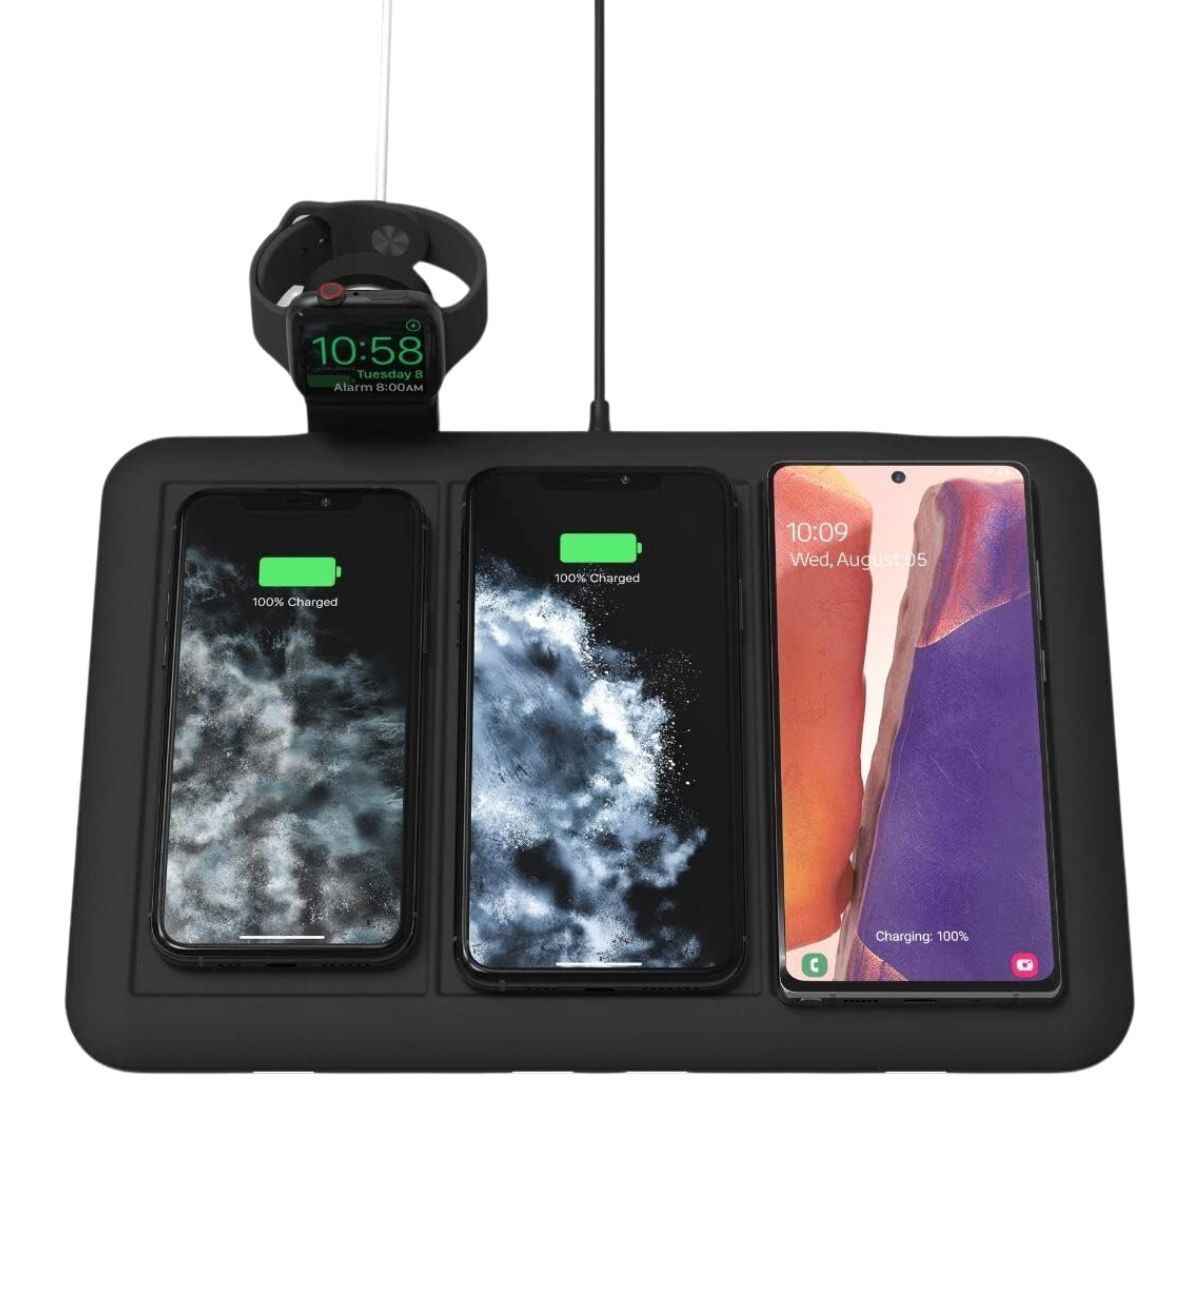 ZAGG mophie 4-in-1 Wireless Charging Mat in use: A person placing their smartphone on the charging mat, with a smartwatch and wireless earbuds already charging. Text overlay: "Power Up Your World: ZAGG mophie 4-in-1 Mat for Phone, Watch, Earbuds & More (UK).